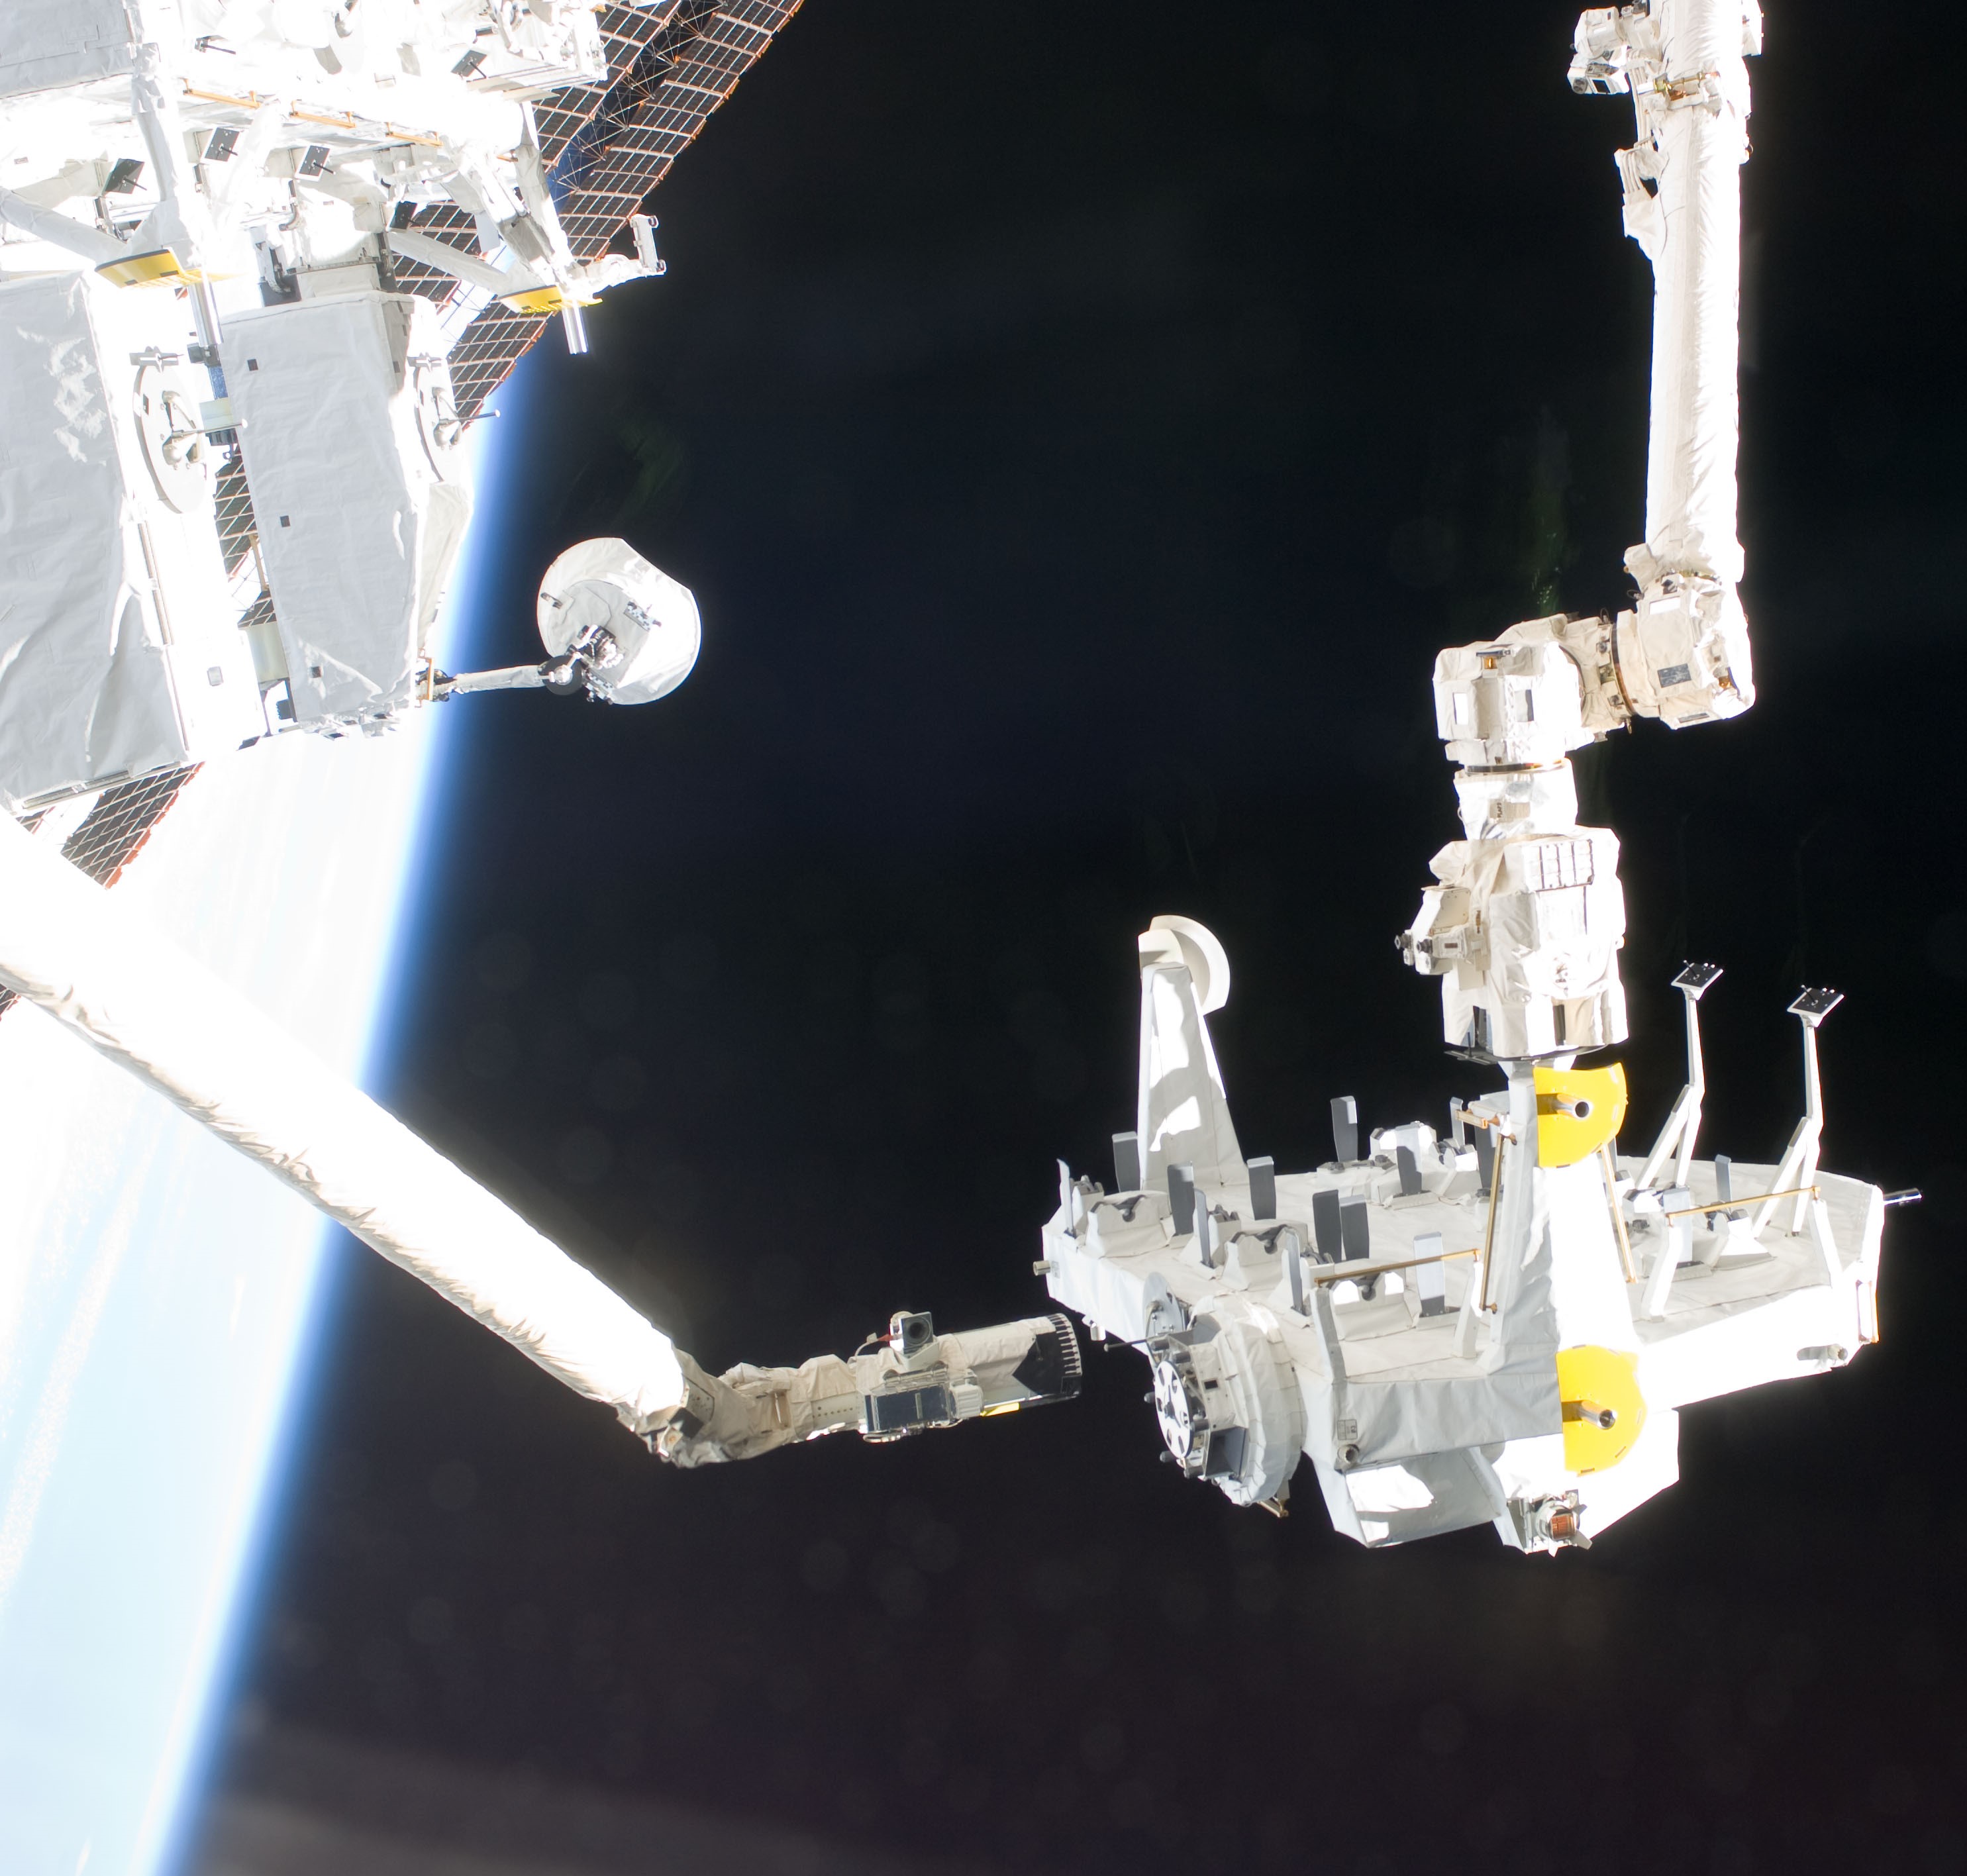 Return of the empty Exposed Logistics Module to Endeavour's payload bay